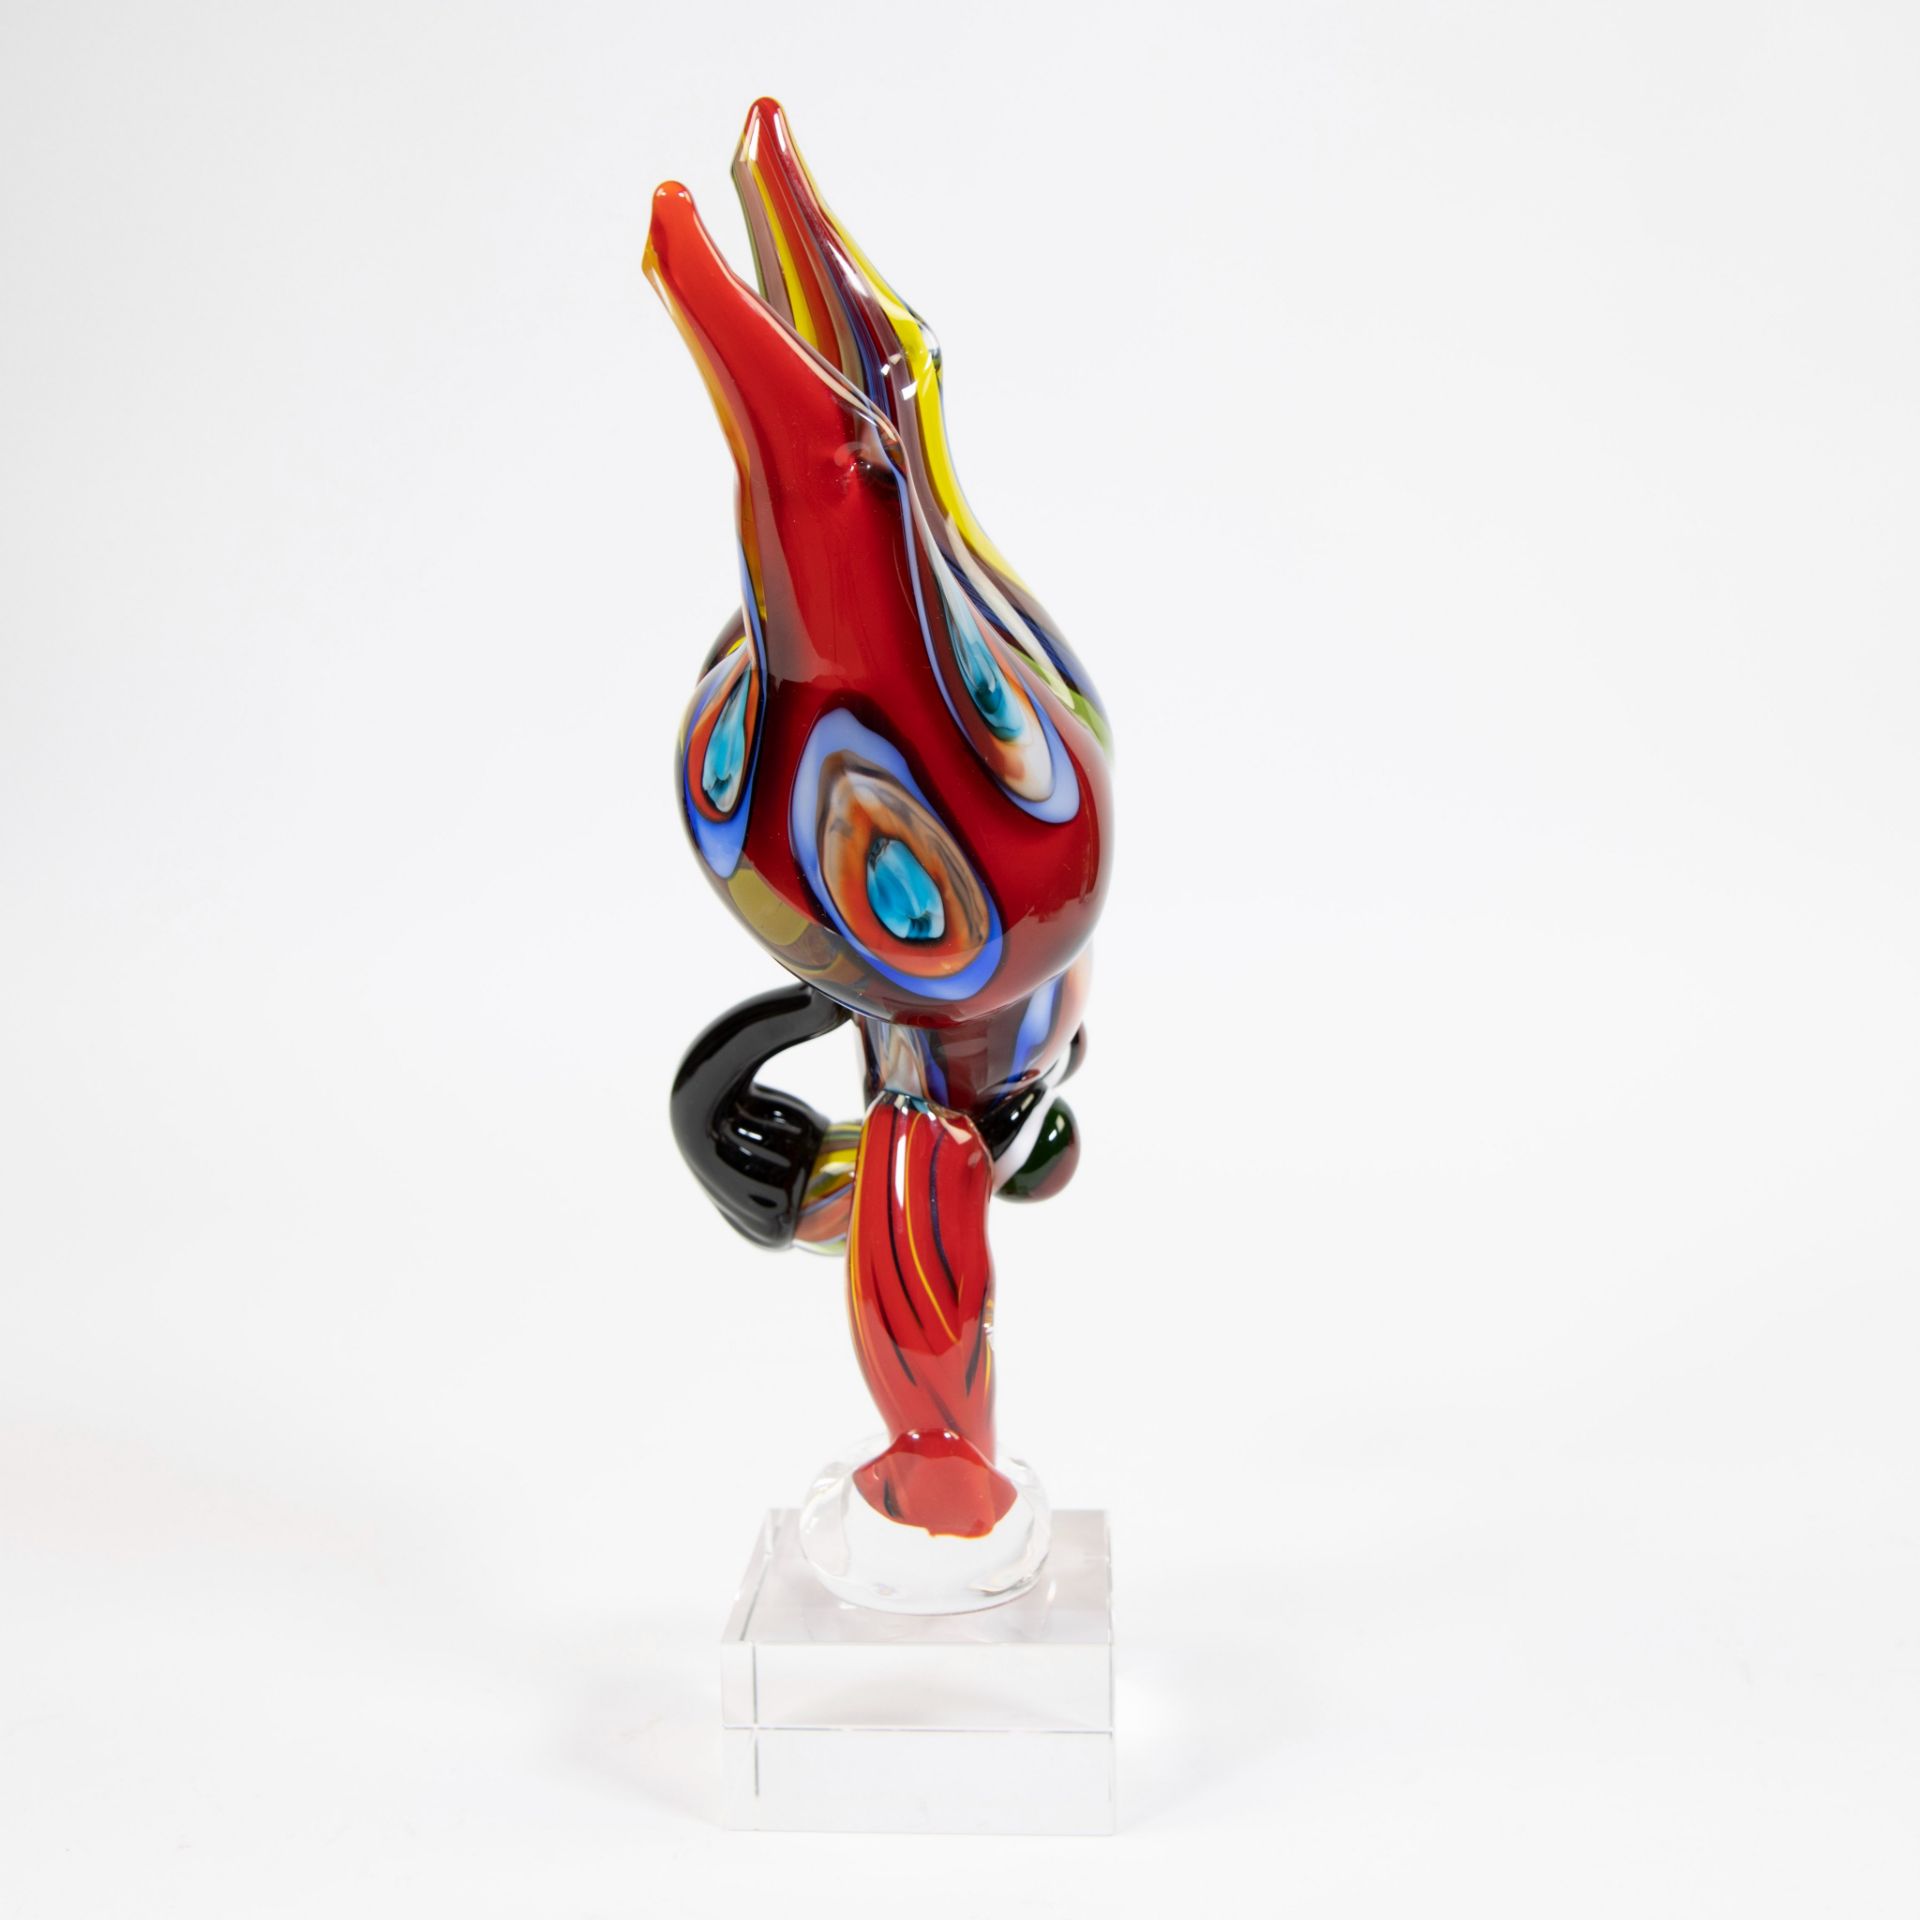 Murano glass sculpture in the style of Nikki De Saint-Phalle - Image 4 of 4